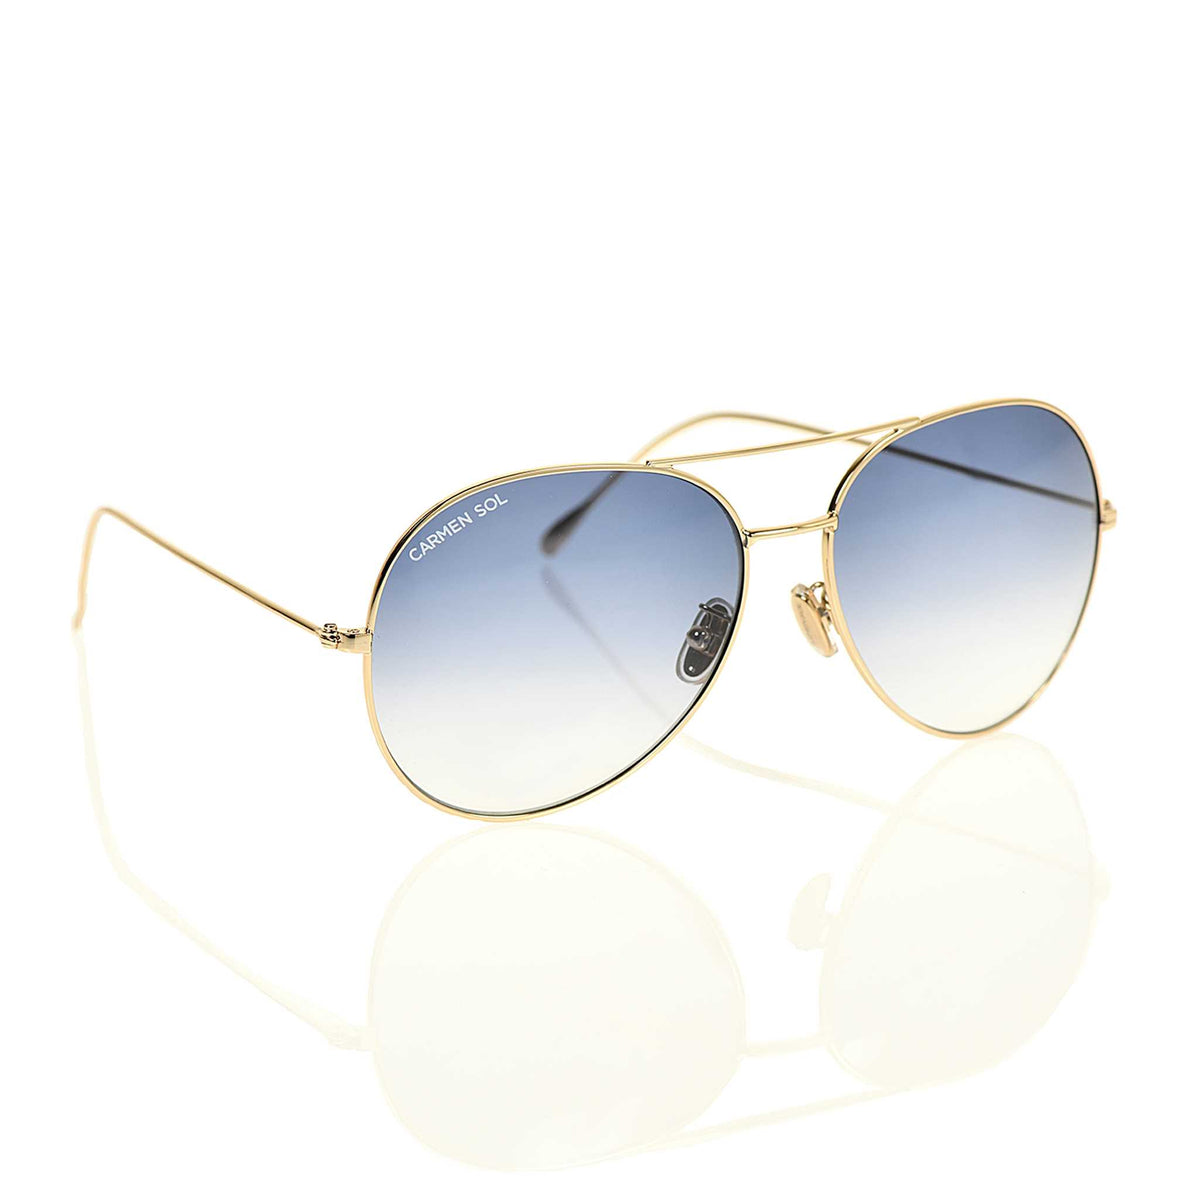 Gold aviator sunglasses with lenses in baby blue 